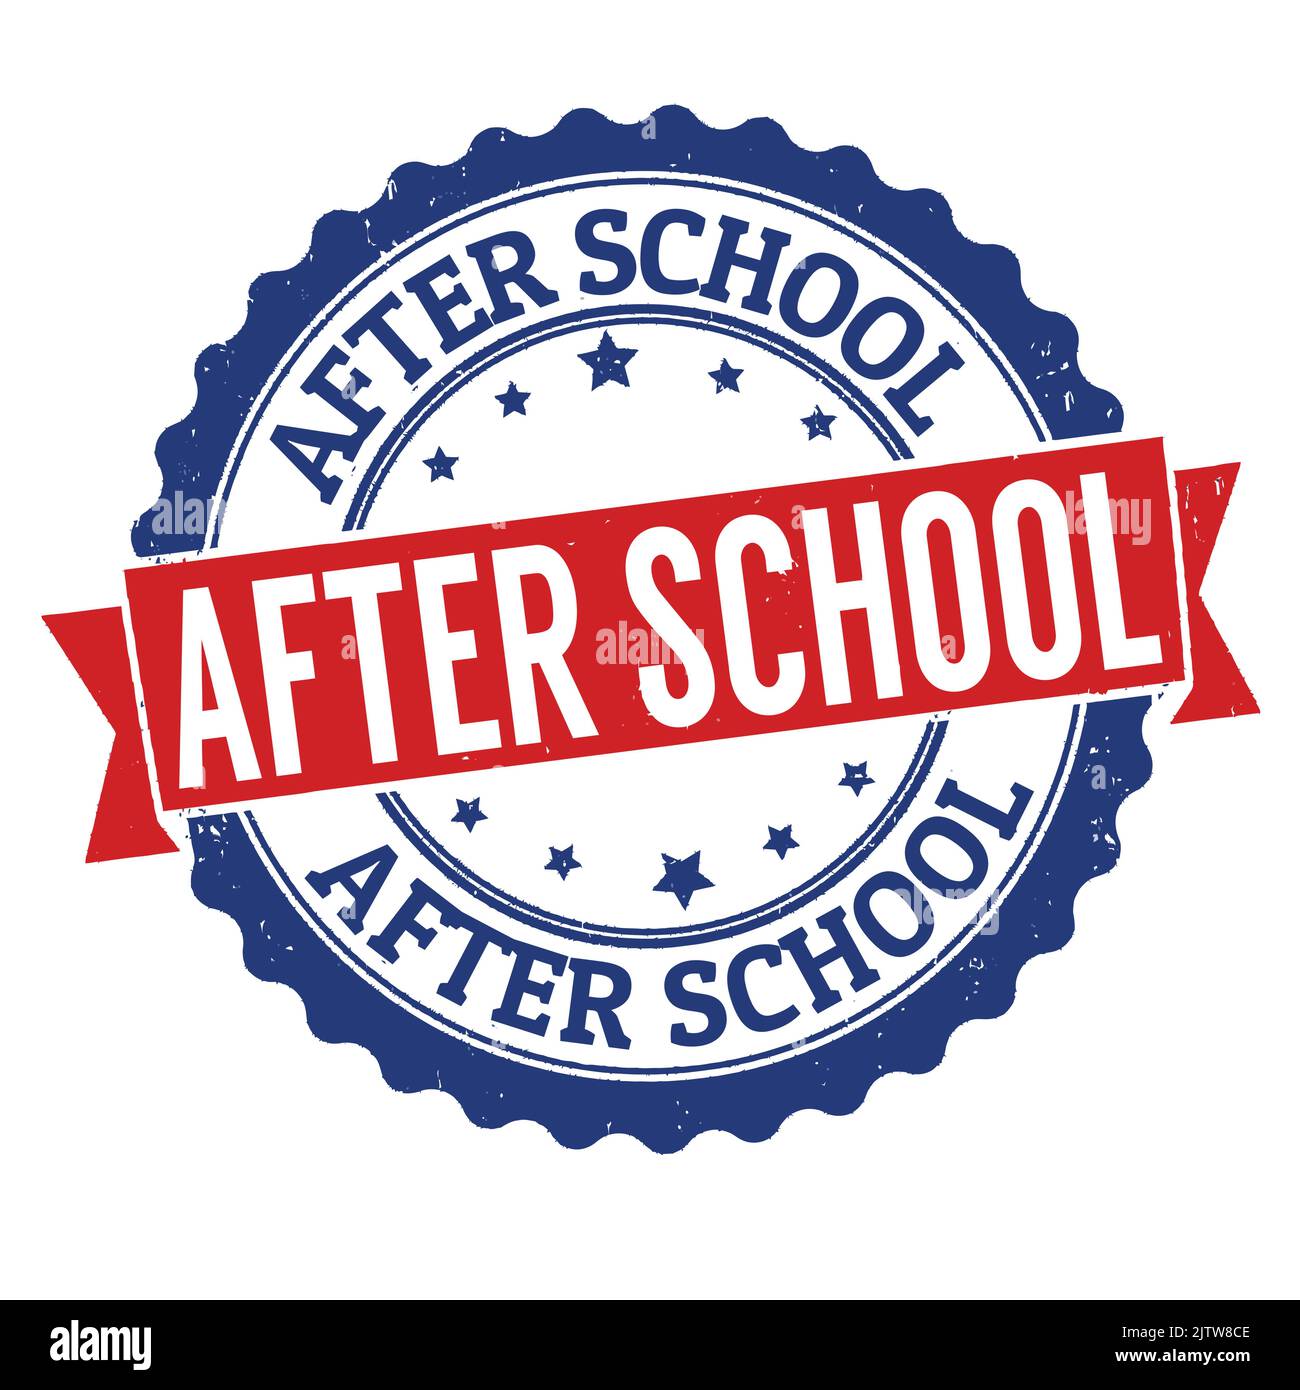 After school grunge rubber stamp on white background, vector illustration Stock Vector